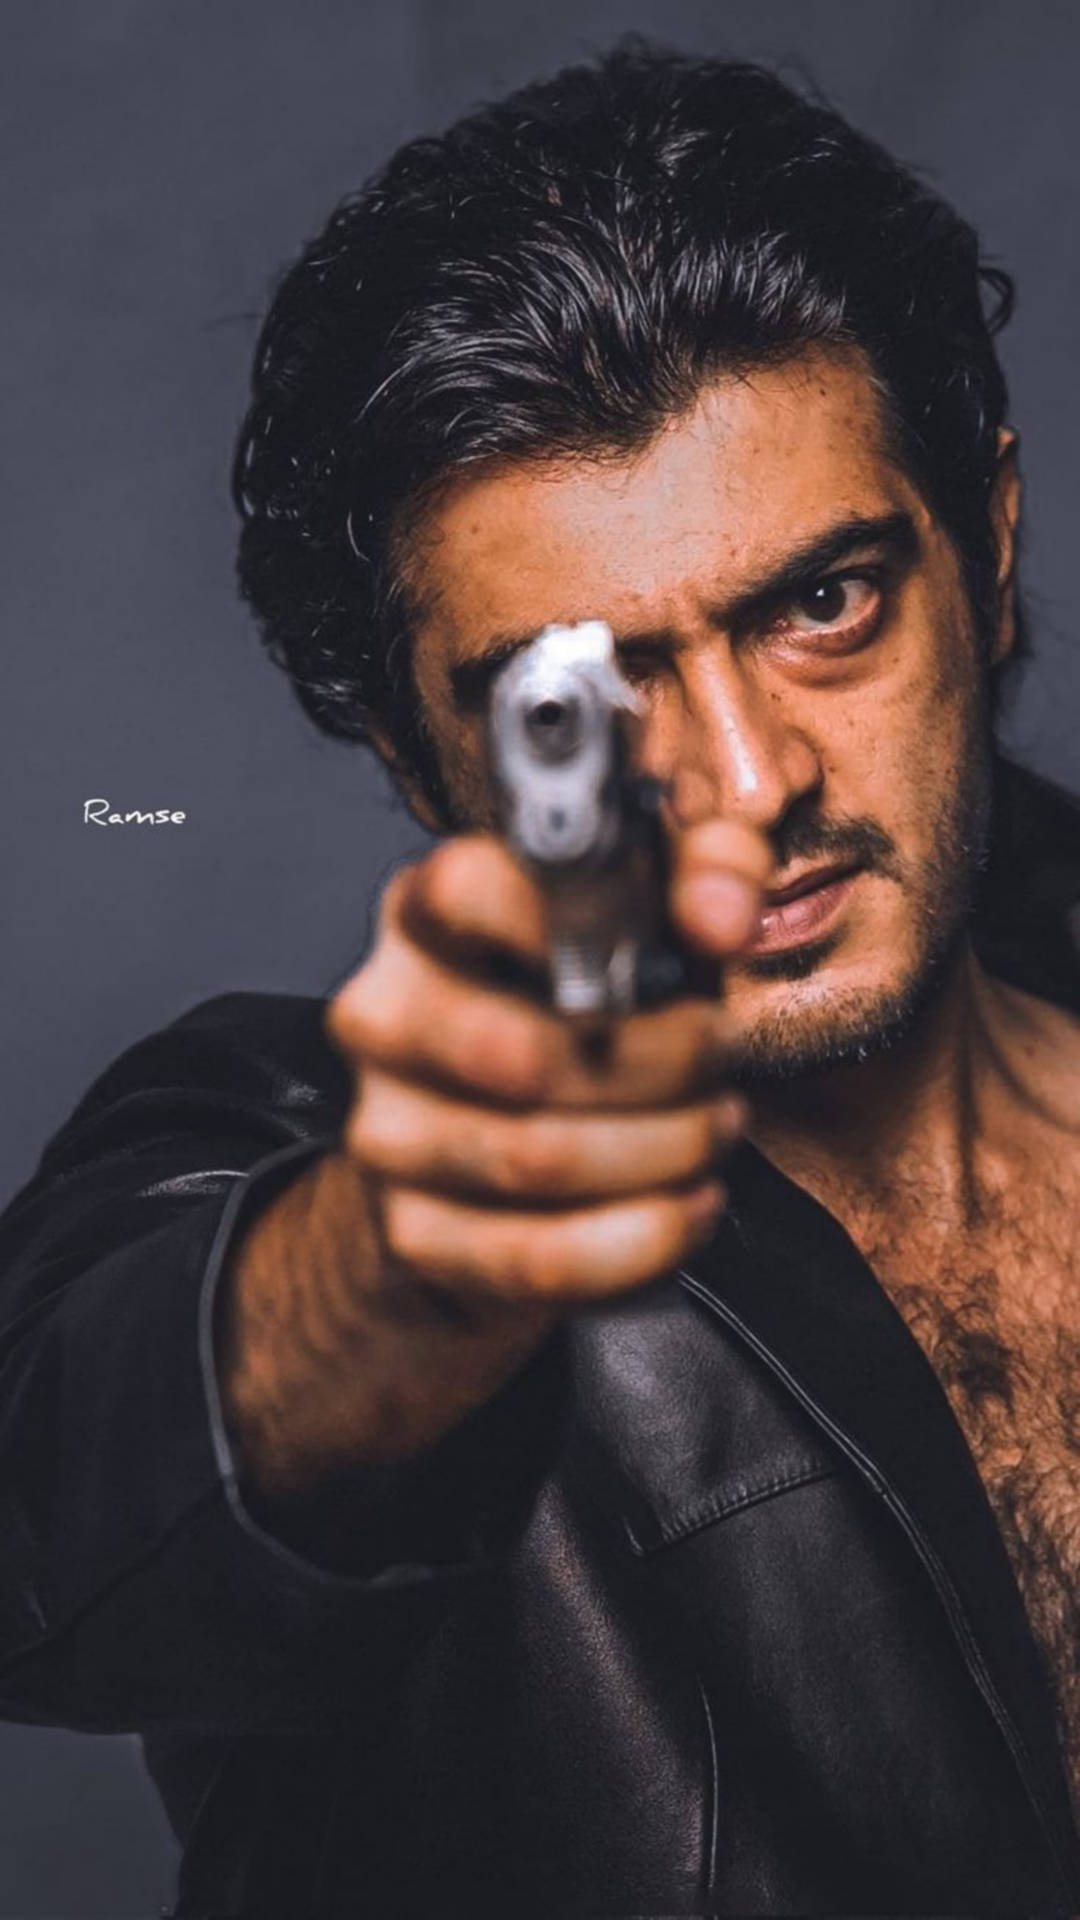 Thalaajith Badass Gangster Would Be Translated To 